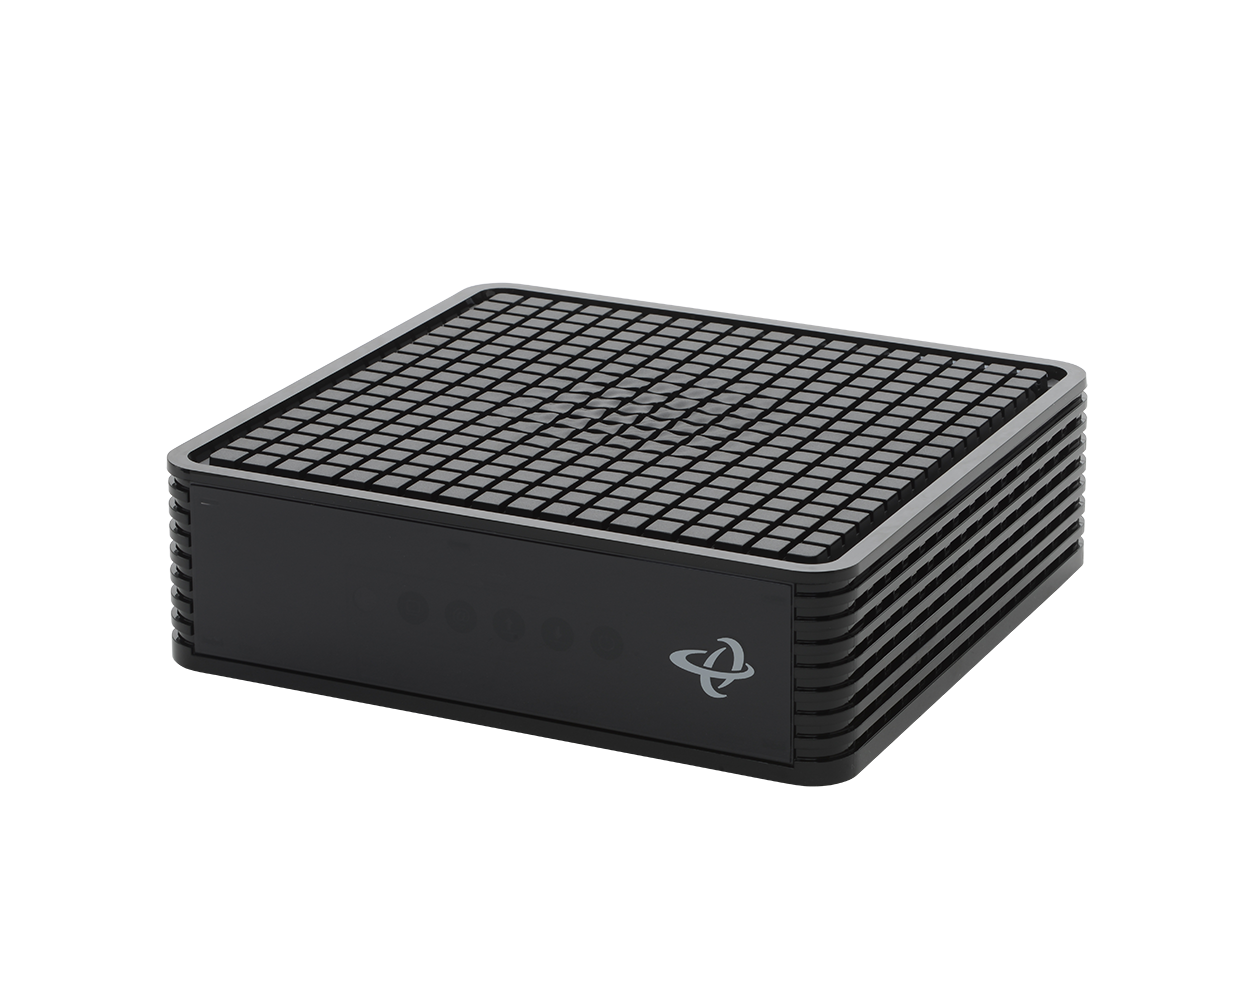 DOCSIS 3.1 Cable Modem from Hitron - CODA47